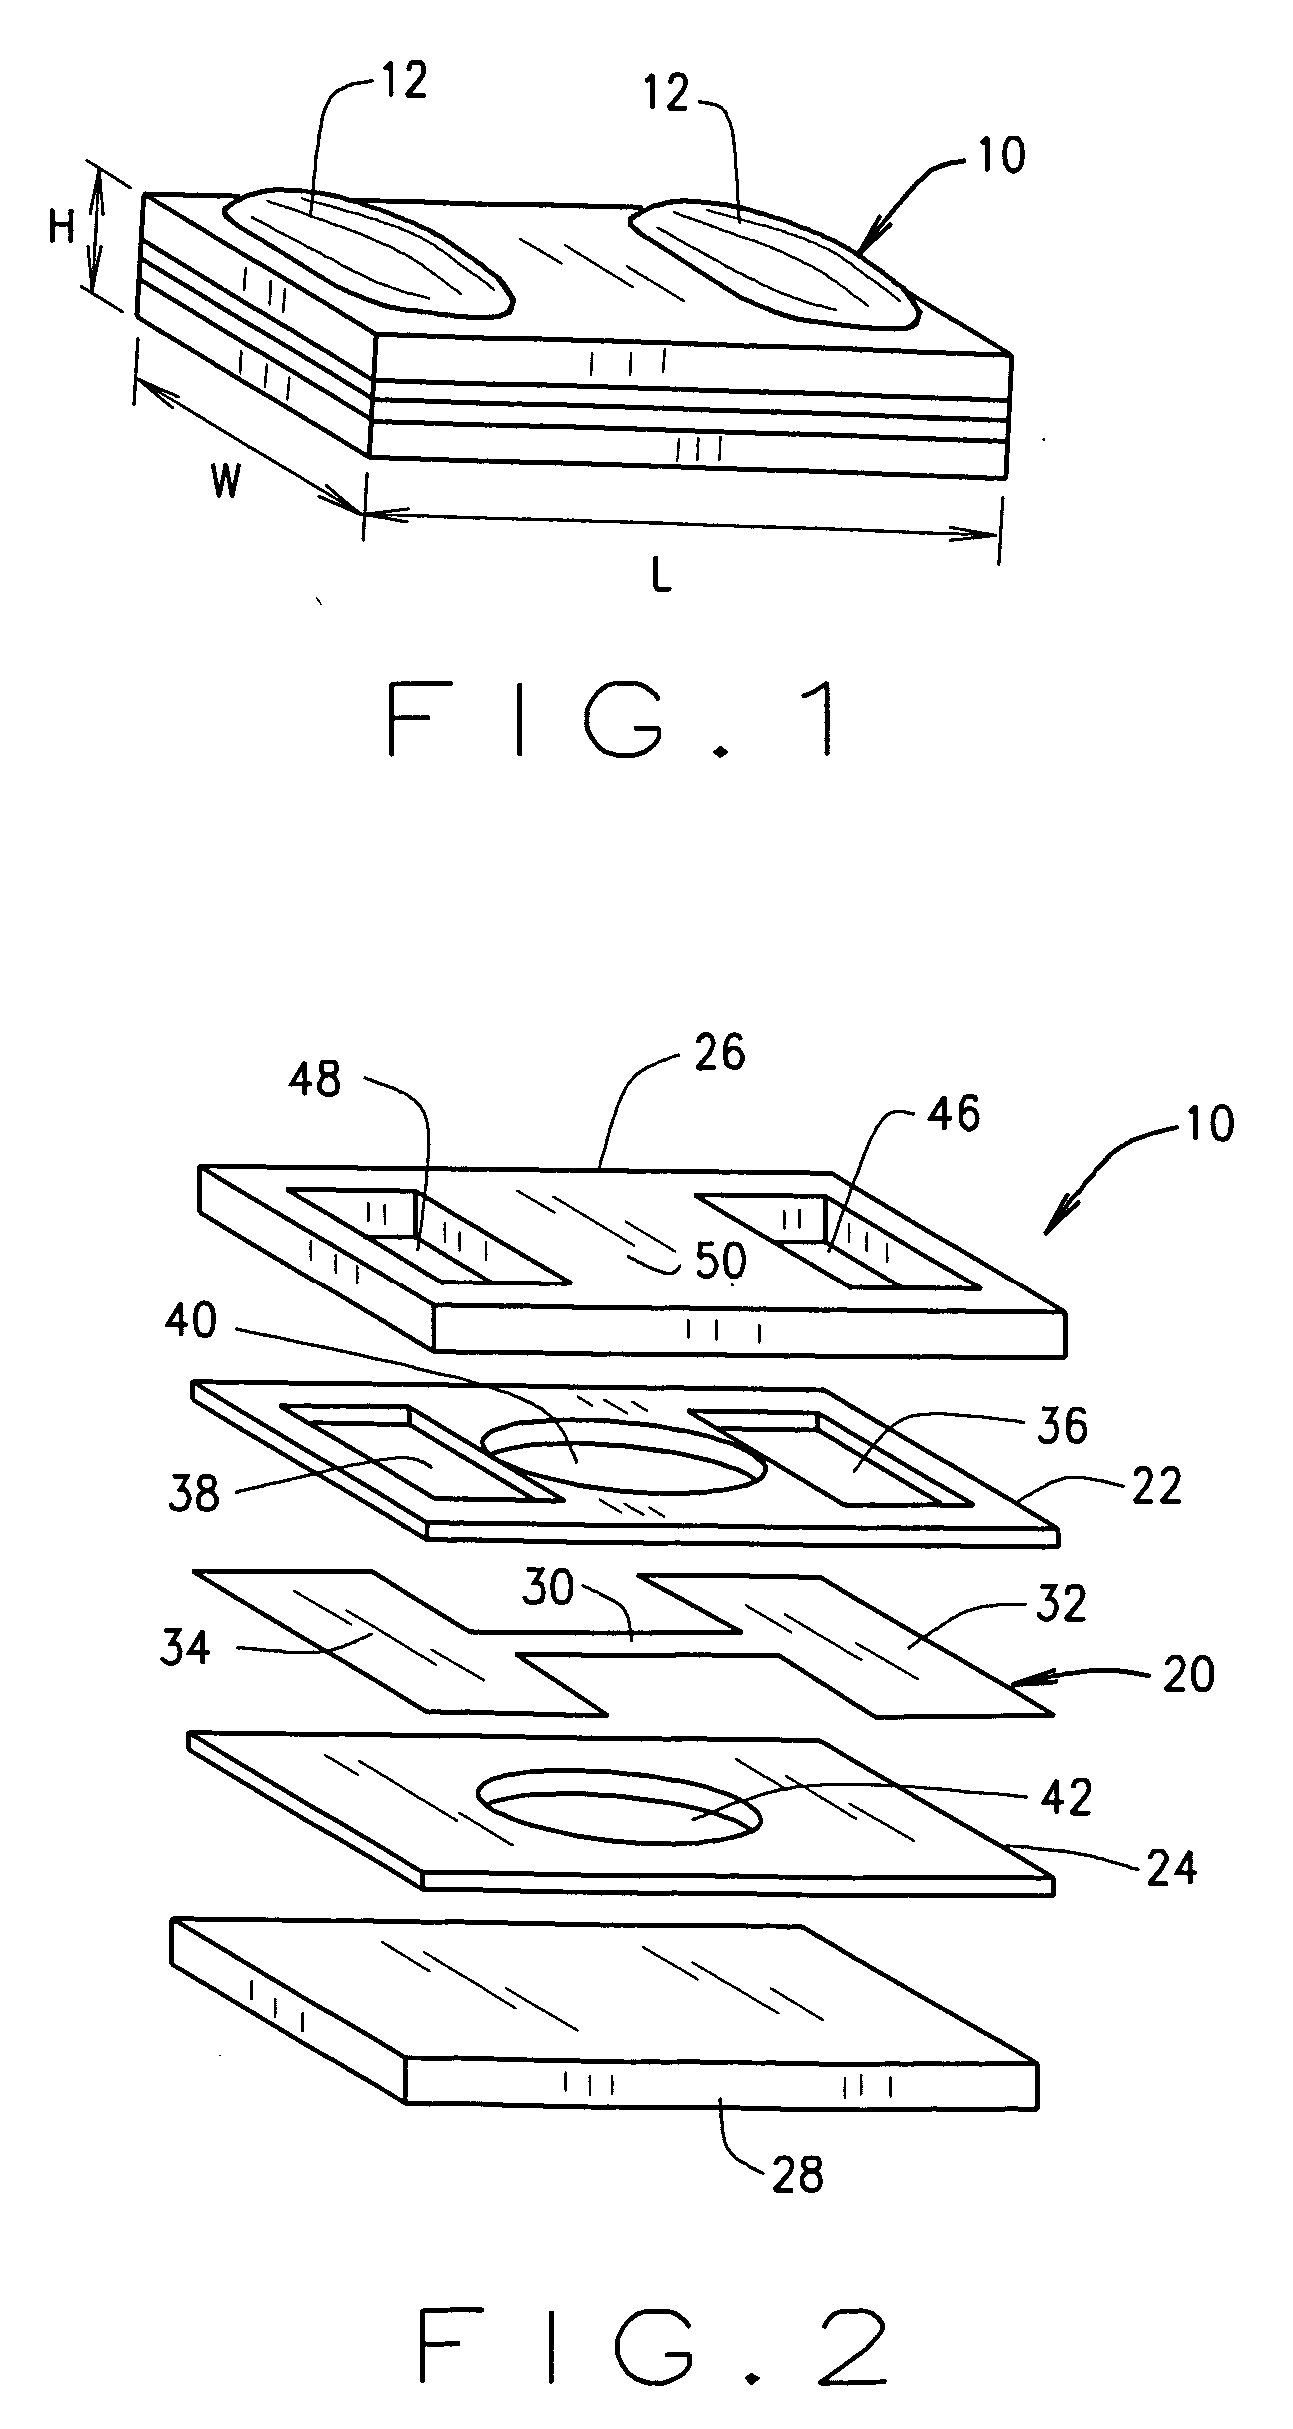 Low resistance polymer matrix fuse apparatus and method